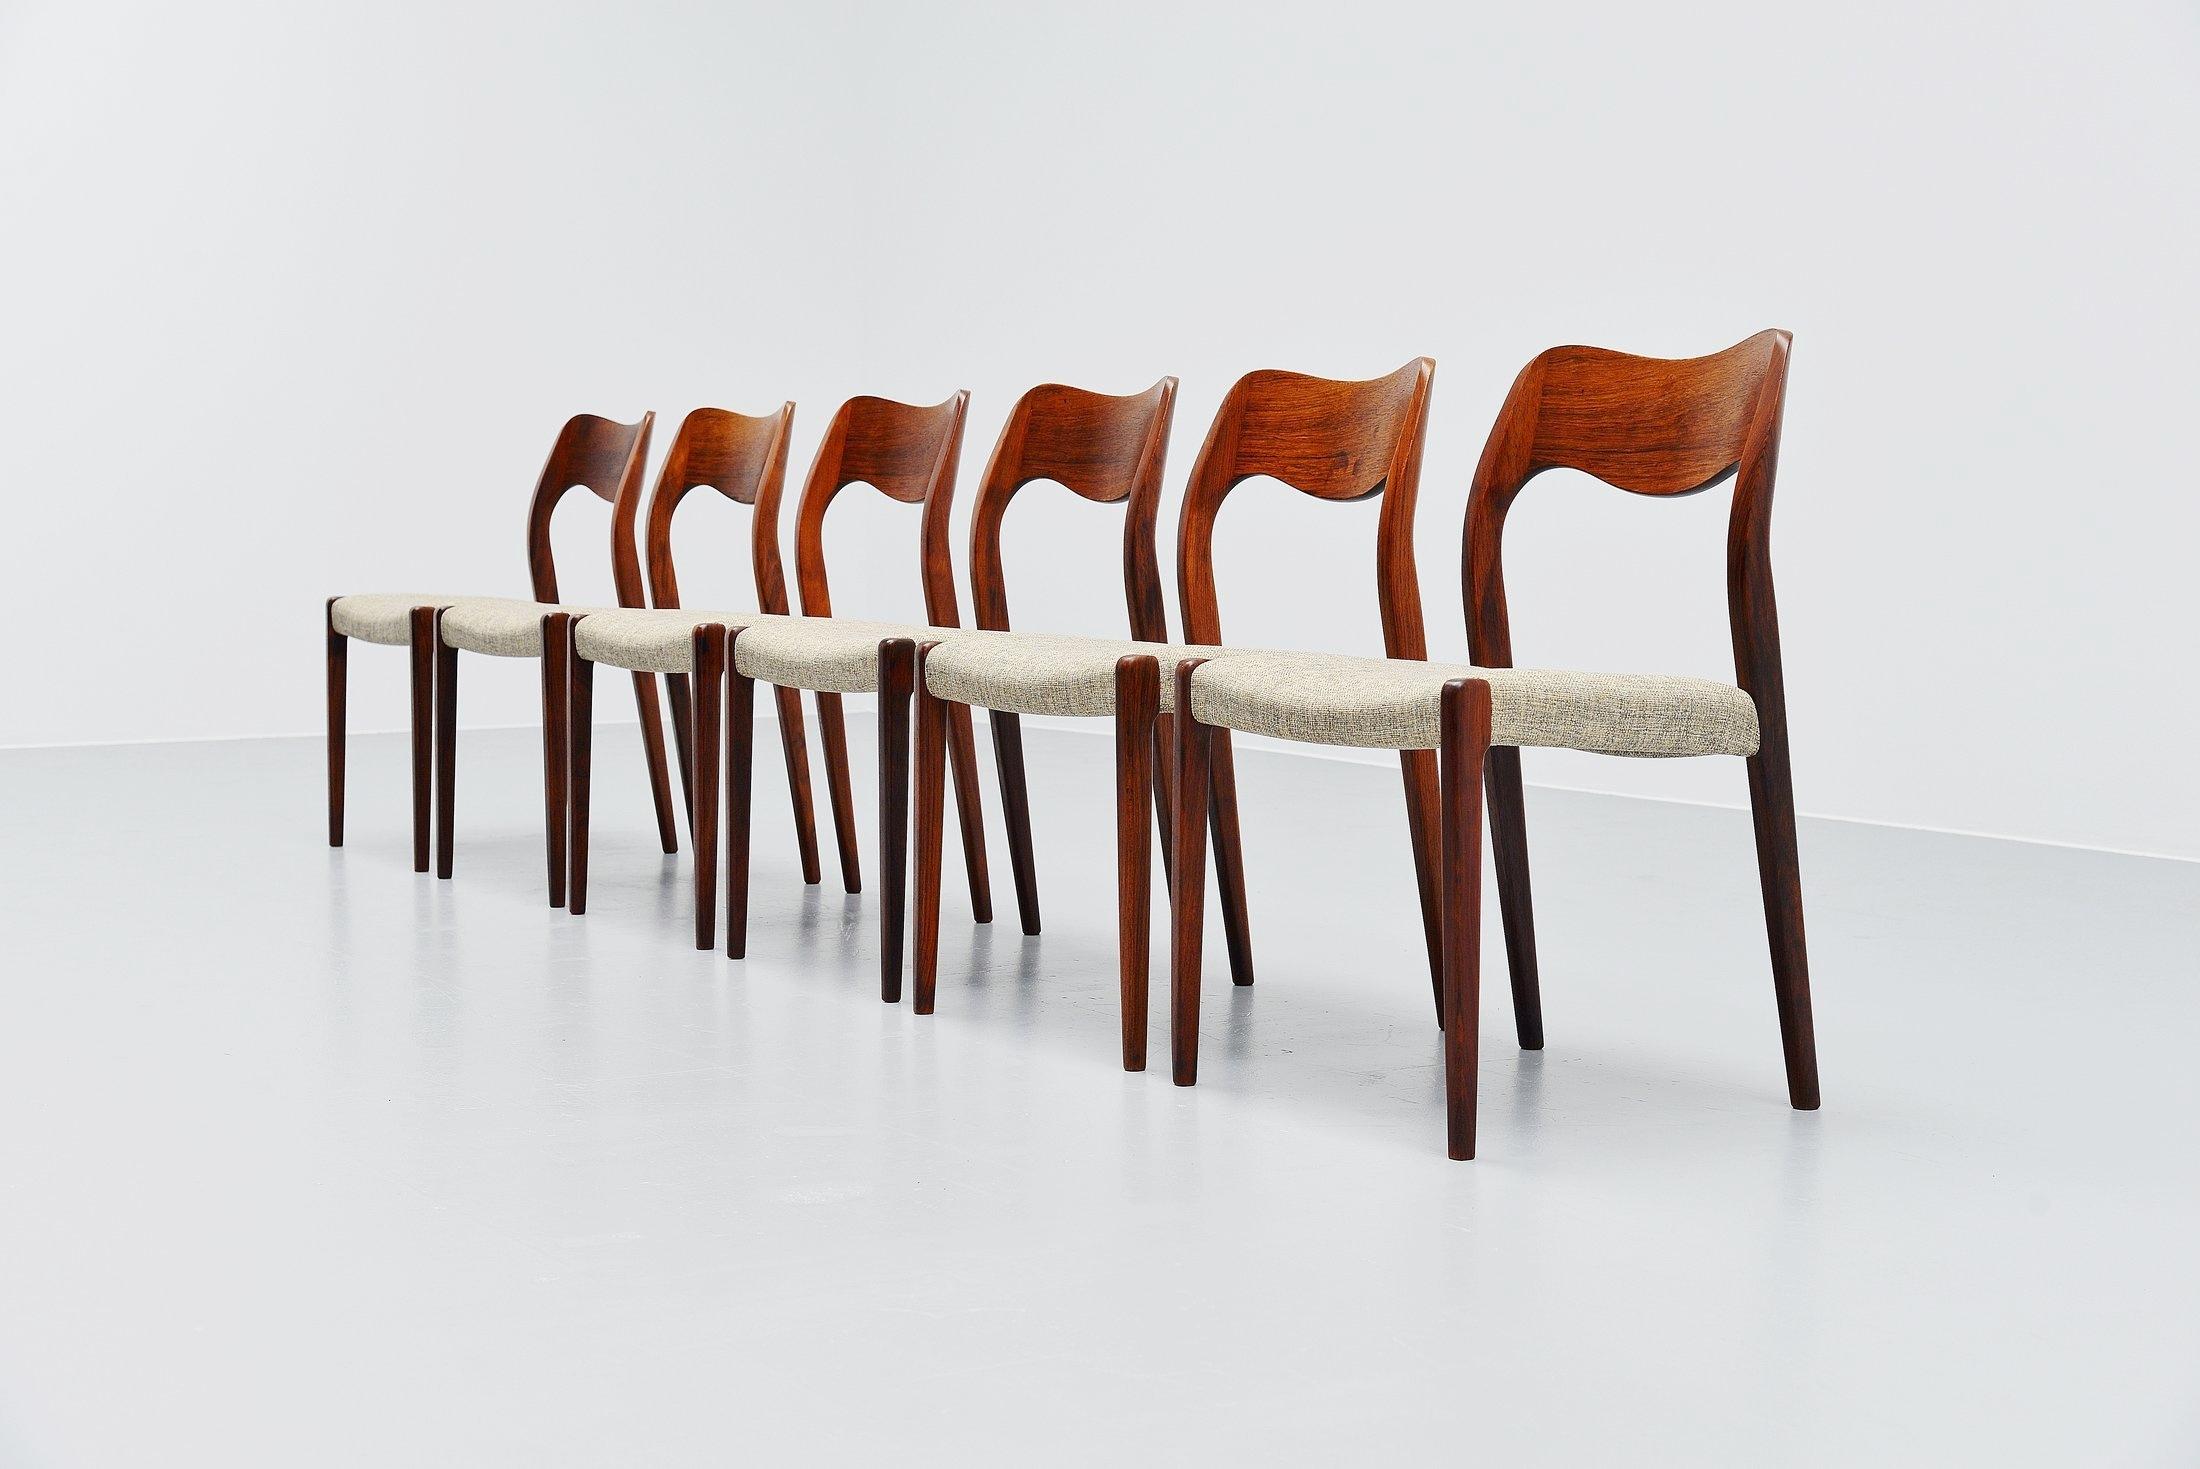 Nice set of 6 dining chairs model 71 designed by Niels Moller and manufactured by J.L. Møller Mobelfabrik, Denmark, 1951. These chairs are made of solid rosewood and are newly upholstered with waterproof upholstery, especially for dining room chairs